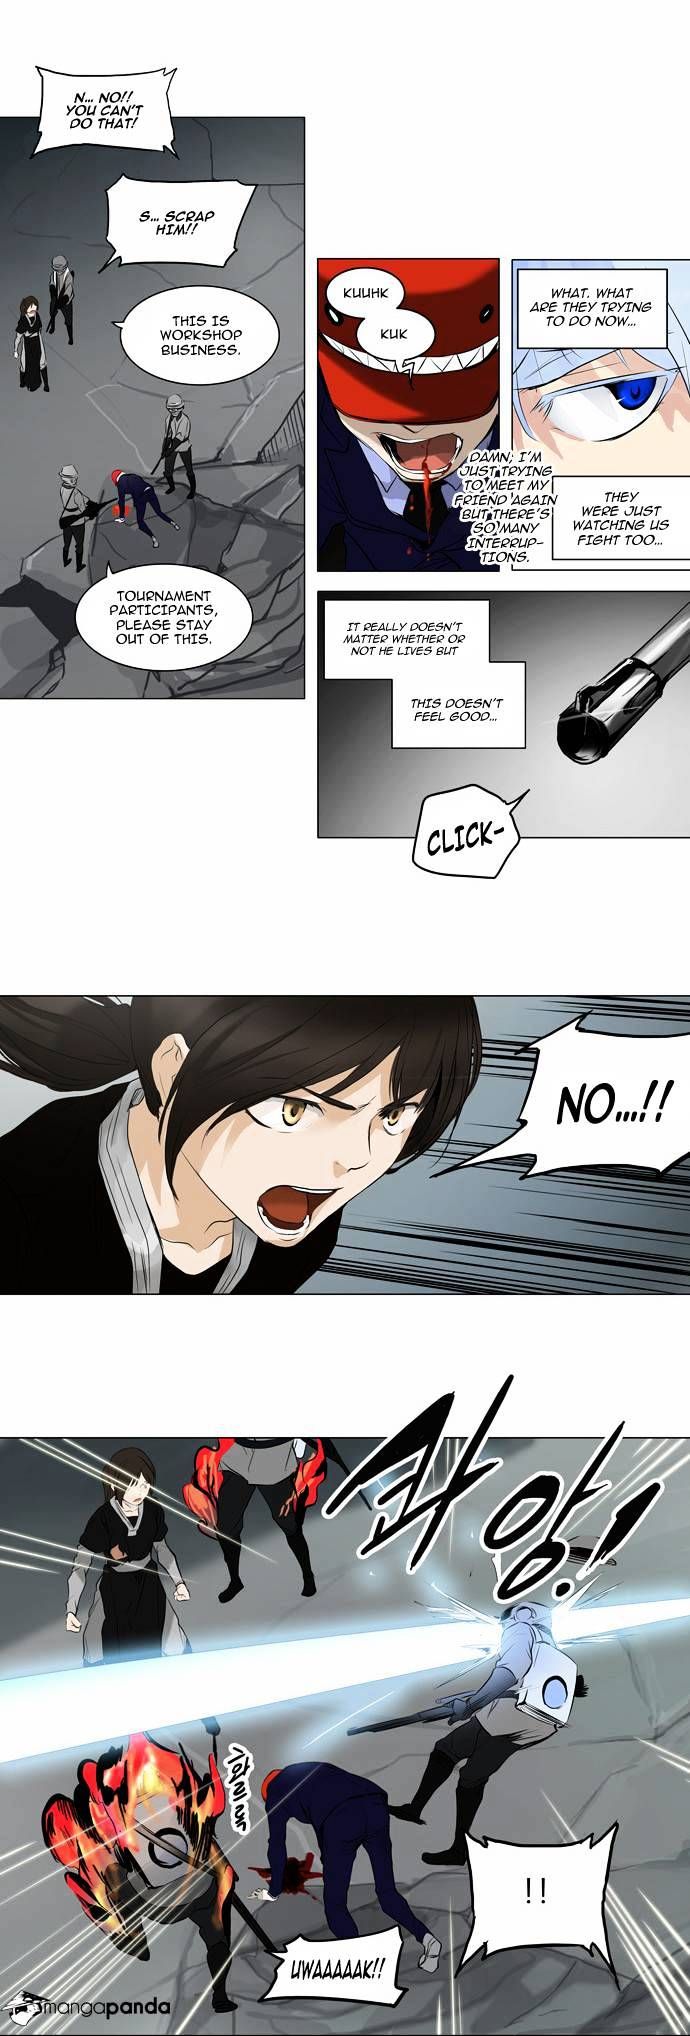 Tower of God Chapter 176 page 14